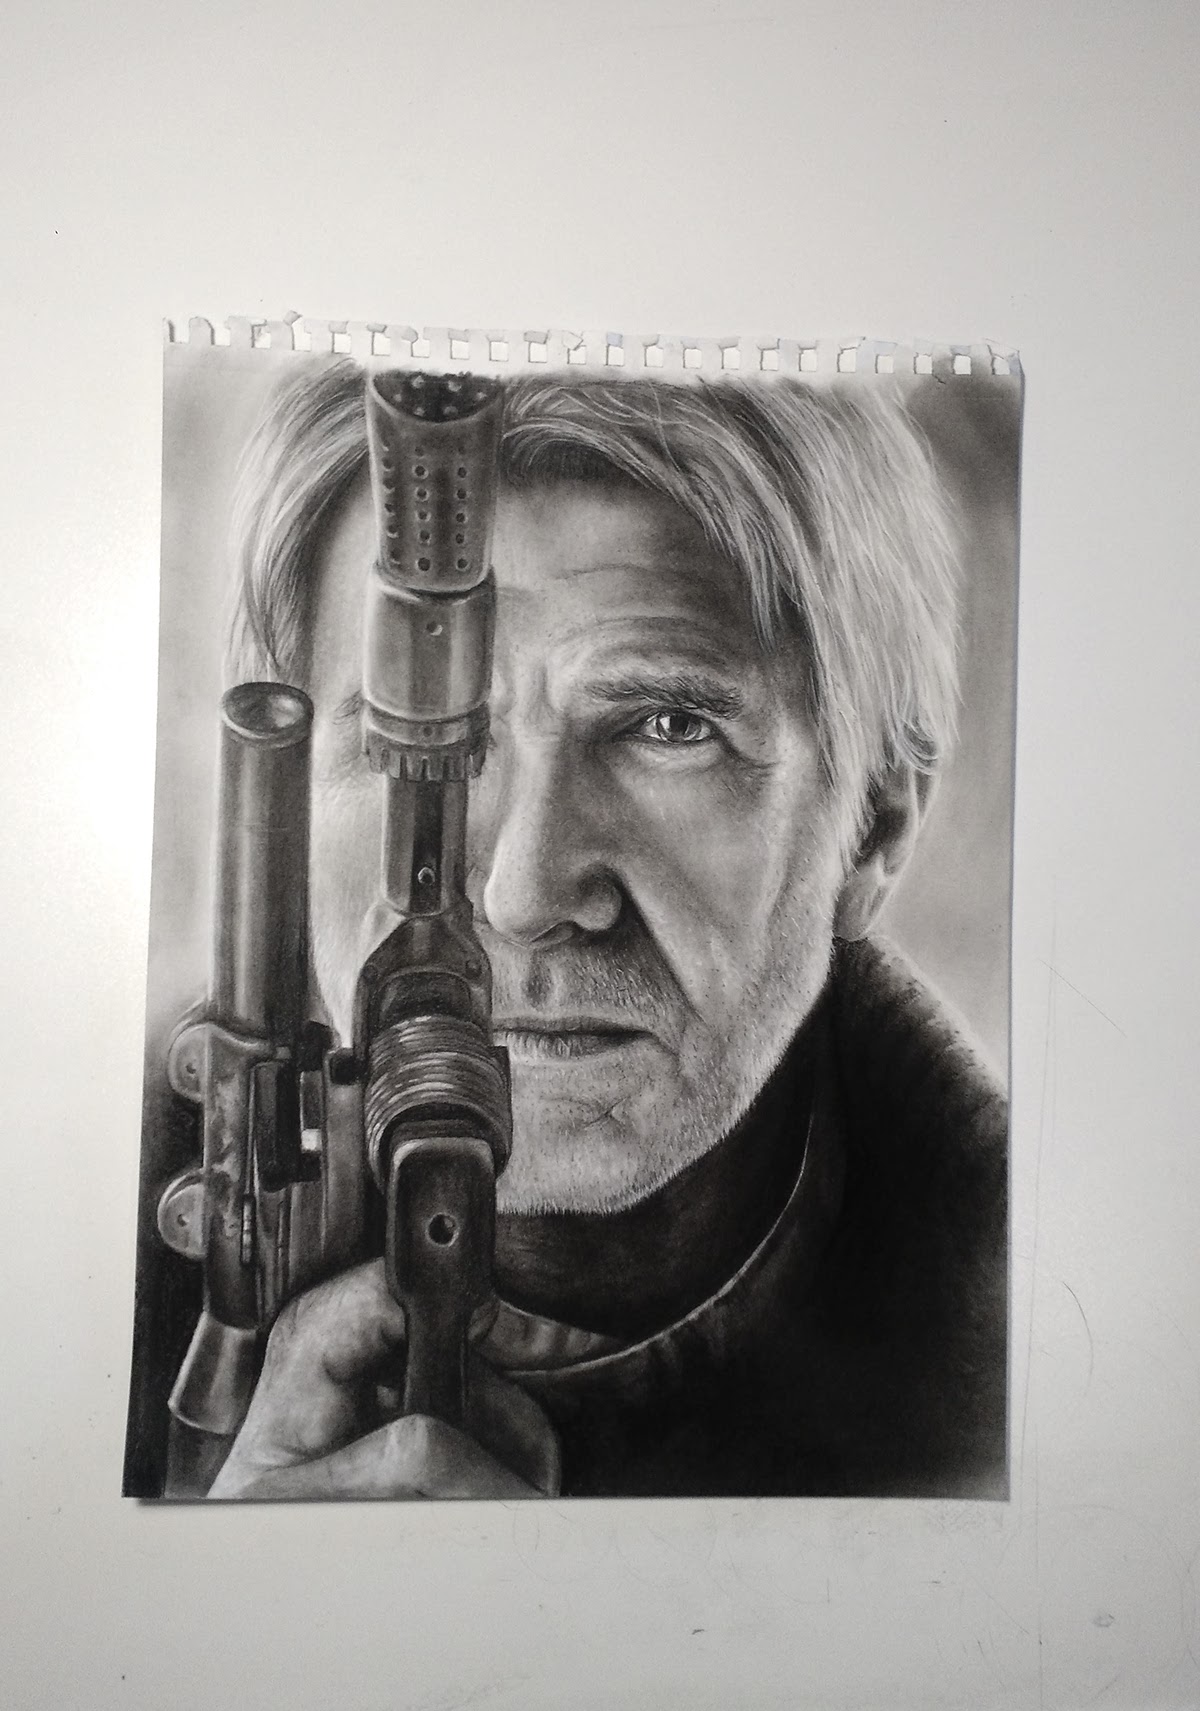 star wars Han Solo charcoal portrait Harrison Ford Realism The Force Awakens star wars art realistic portraiture contrast photo realism black and white